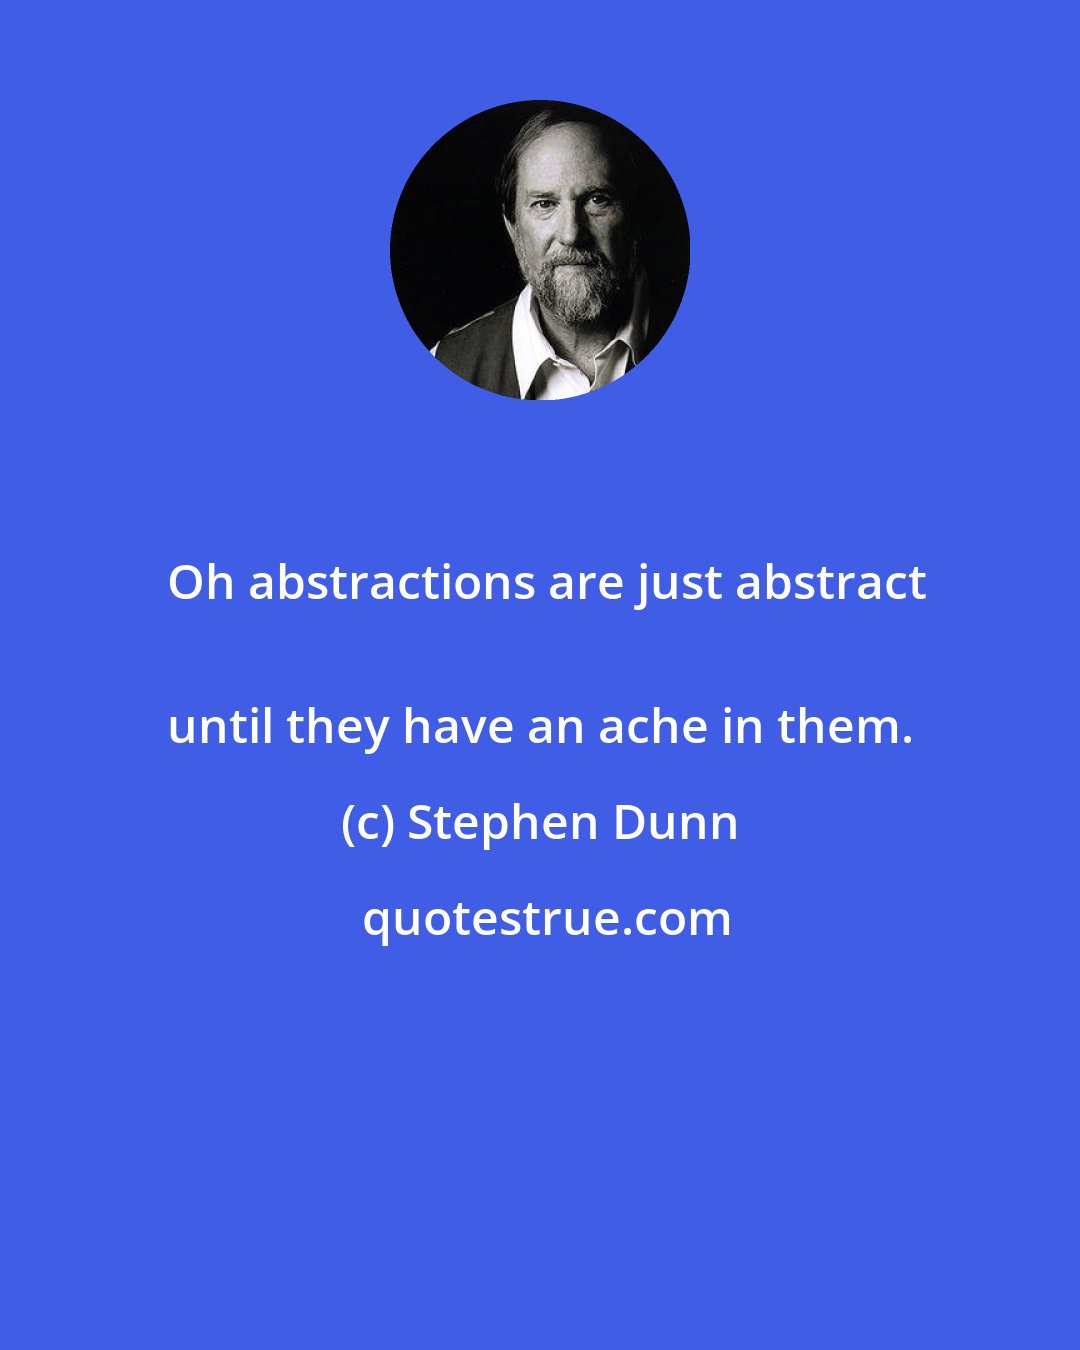 Stephen Dunn: Oh abstractions are just abstract
 until they have an ache in them.